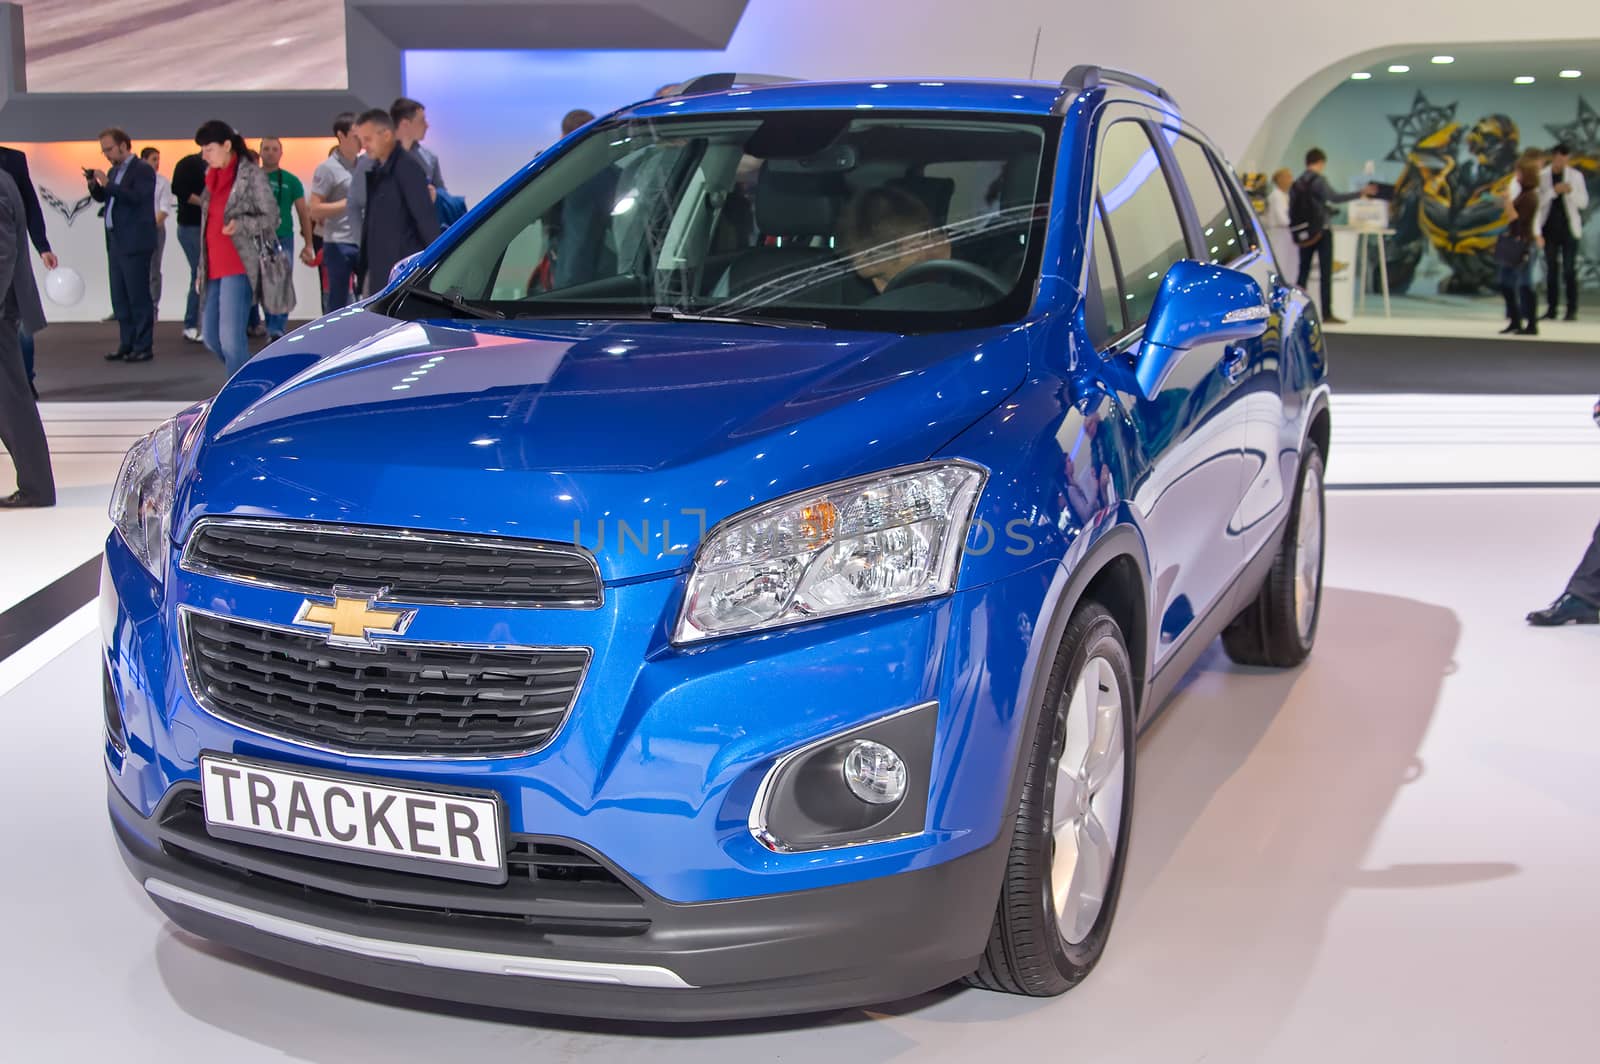 Moscow-September 2: Chevrolet Tracker at the Moscow International Automobile Salon on September 2, 2014 in Moscow